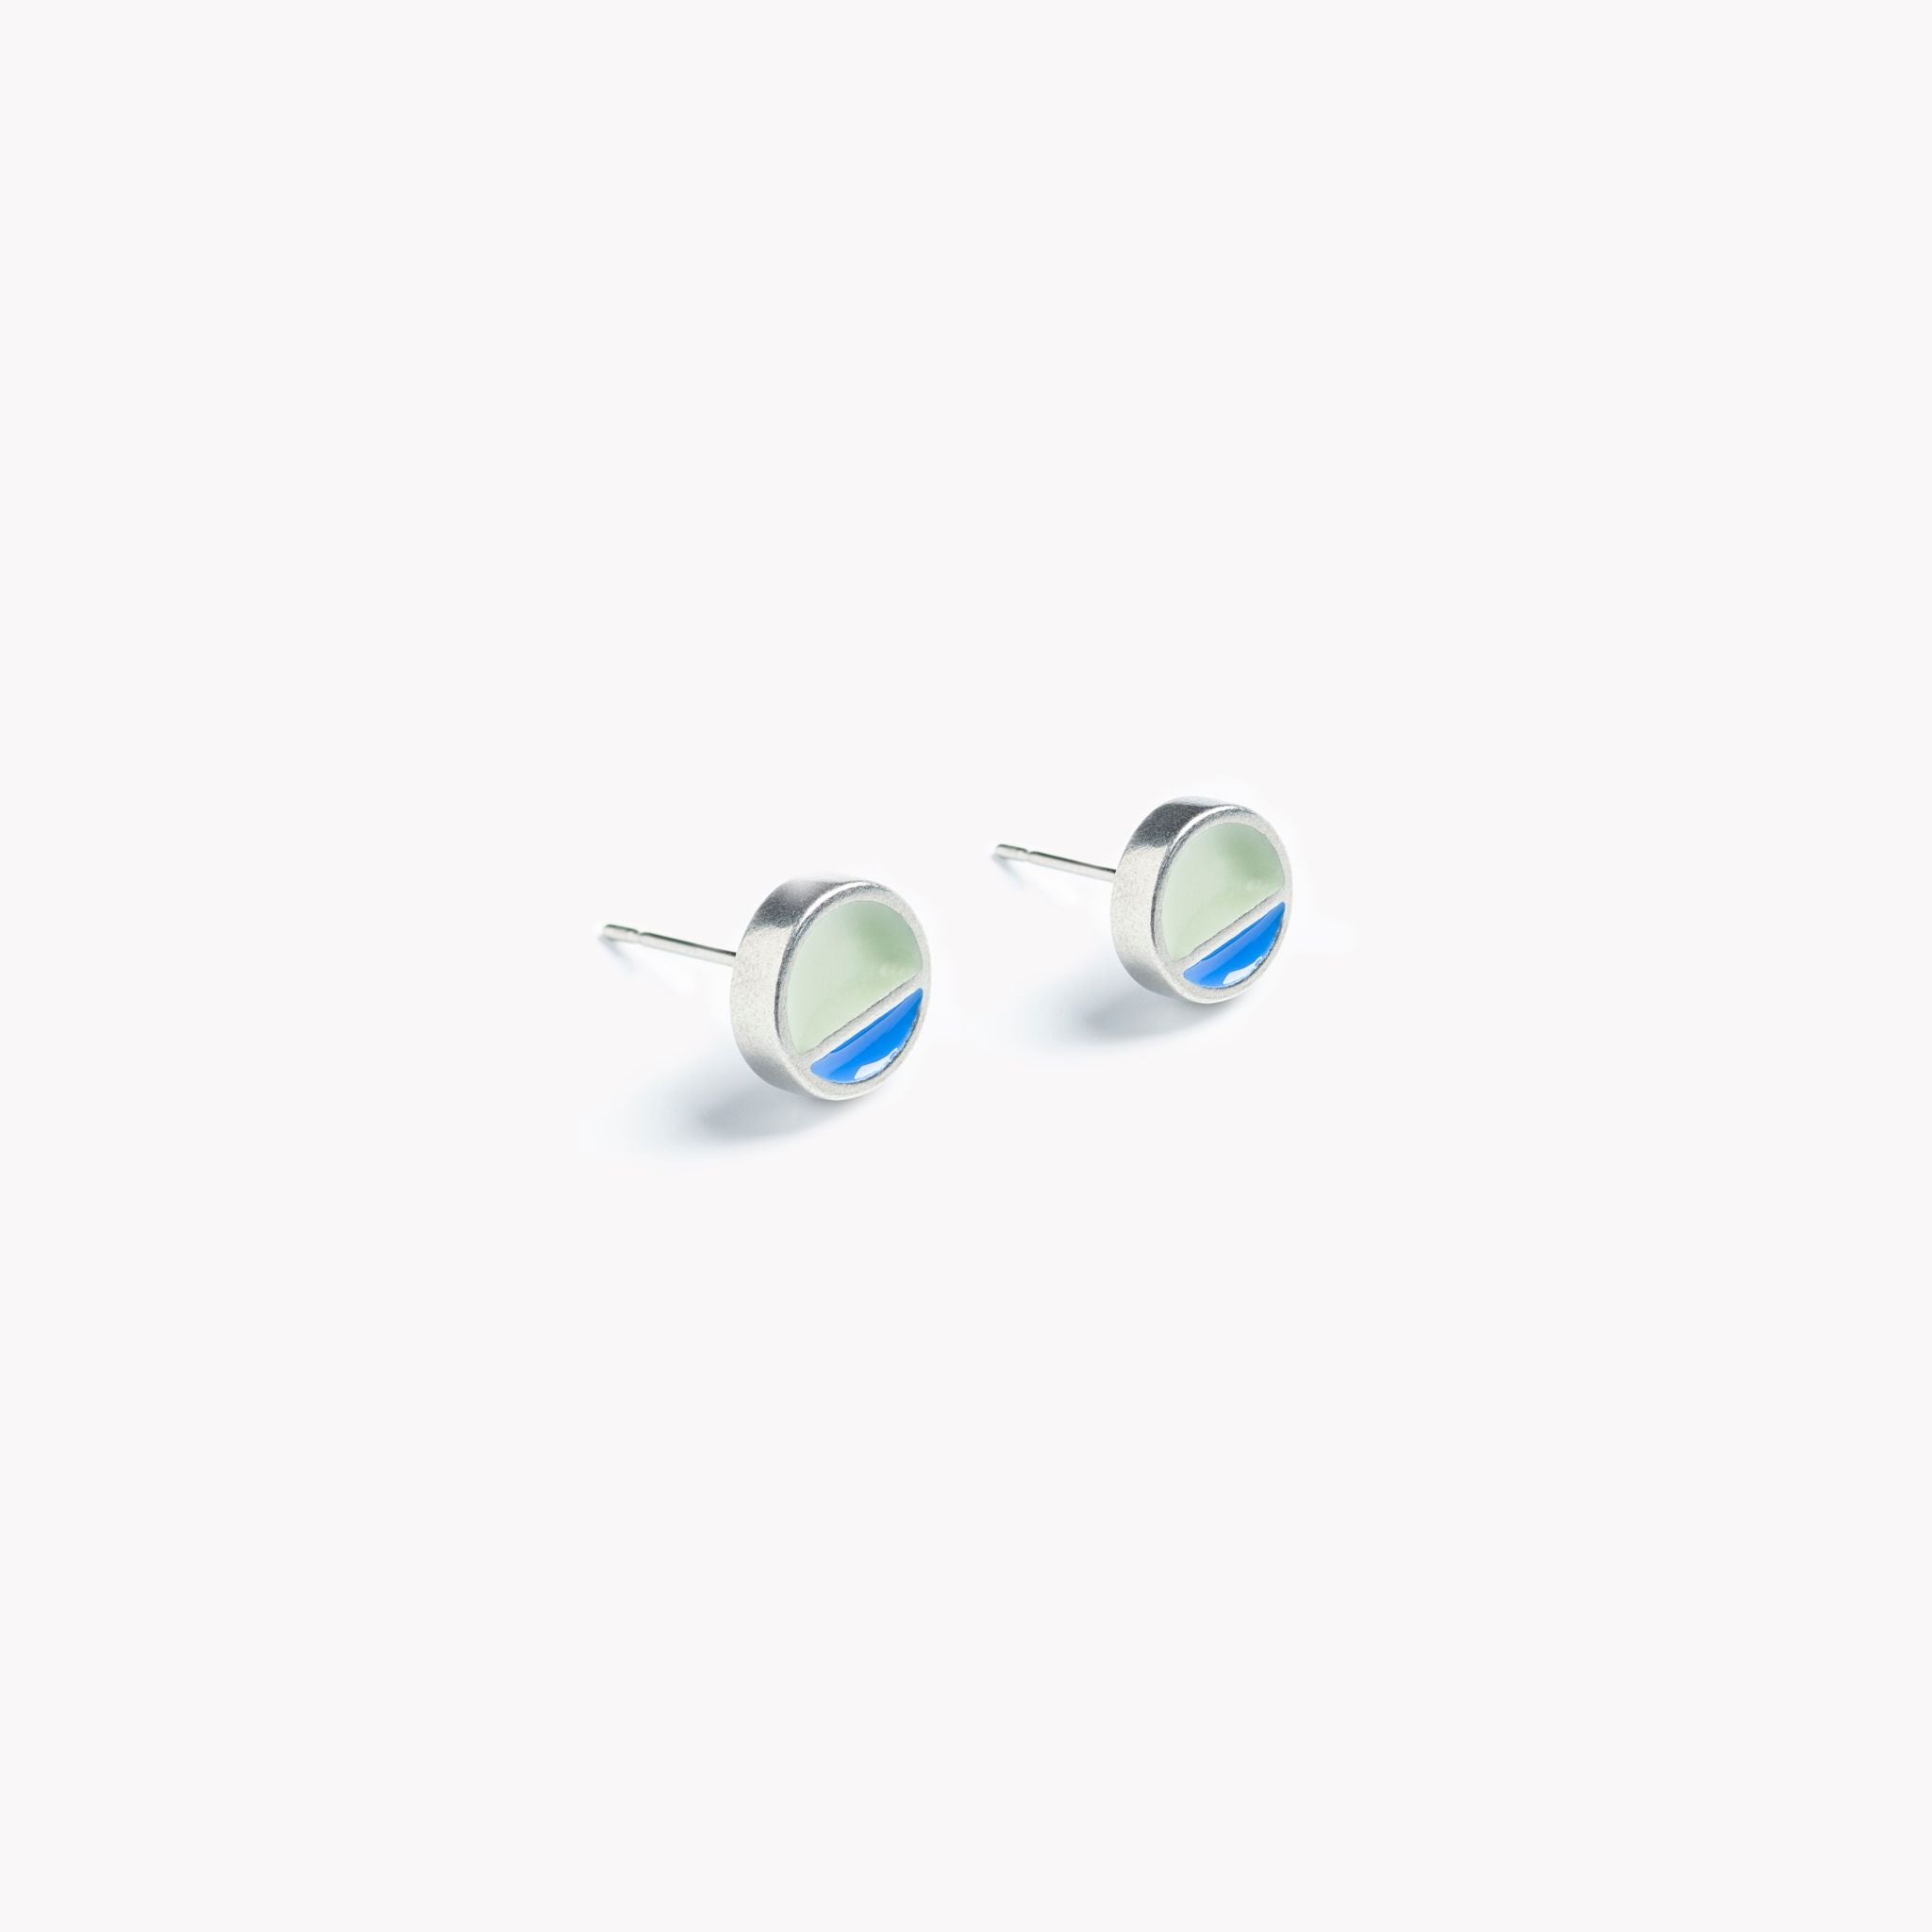 A simple pair of circular stud earrings with a horizontal division. In blue and grey.